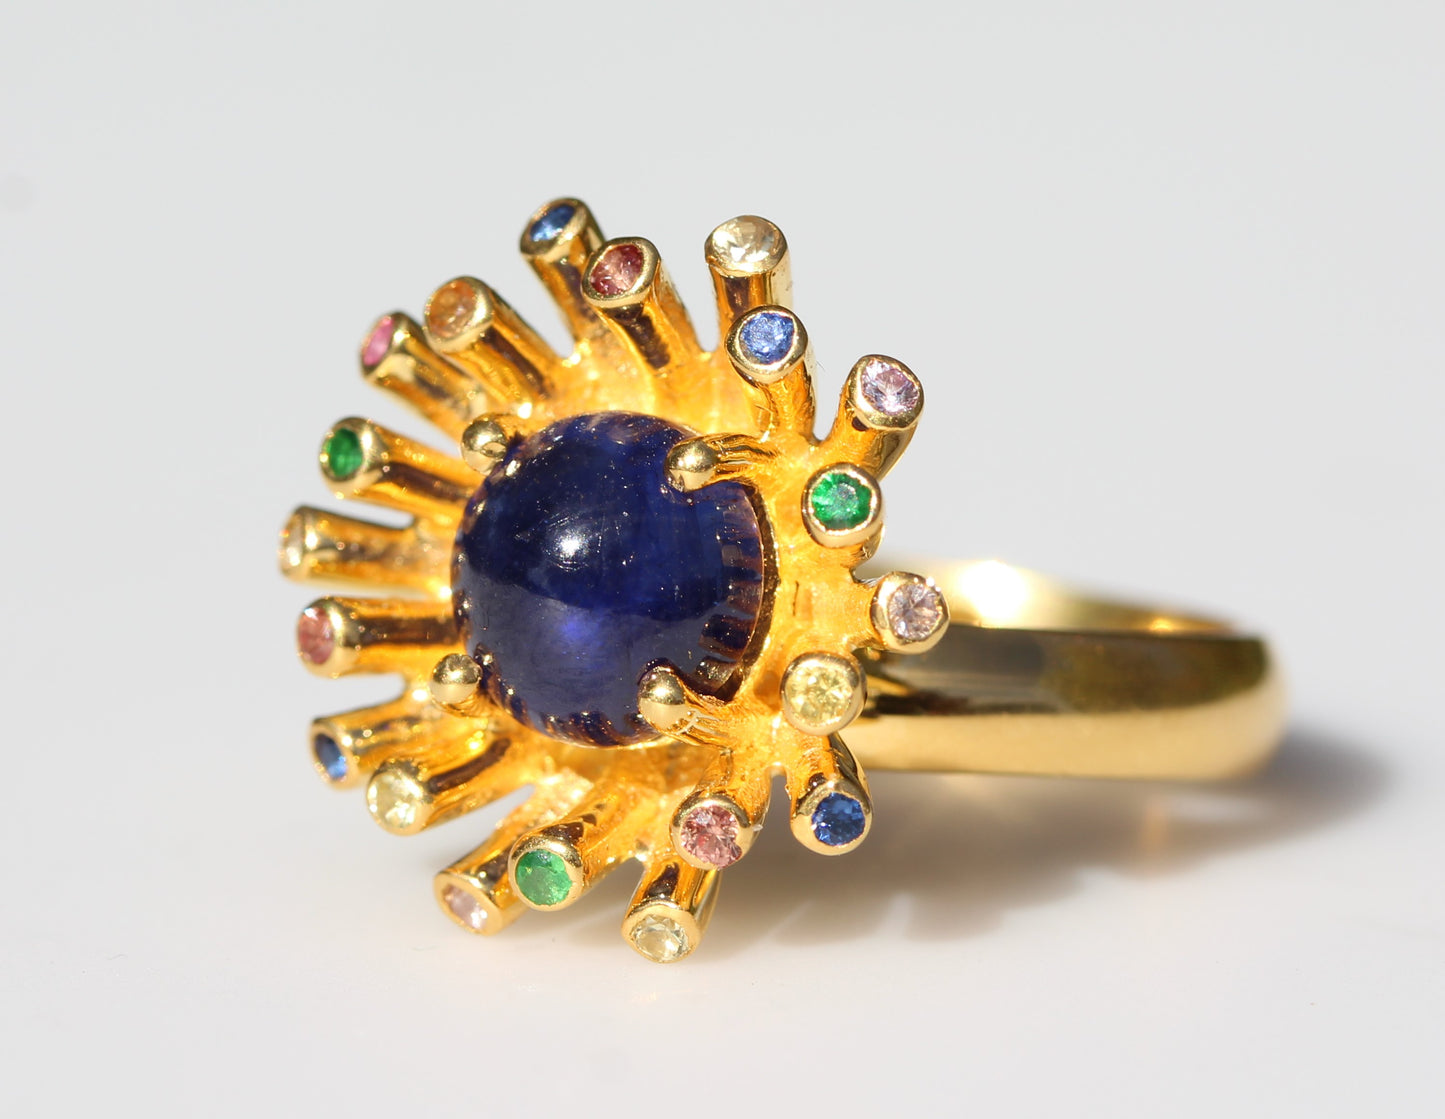 Blue Sapphire Starburst Ring - 24k Gold Plated Silver - Adjustable Size  #305